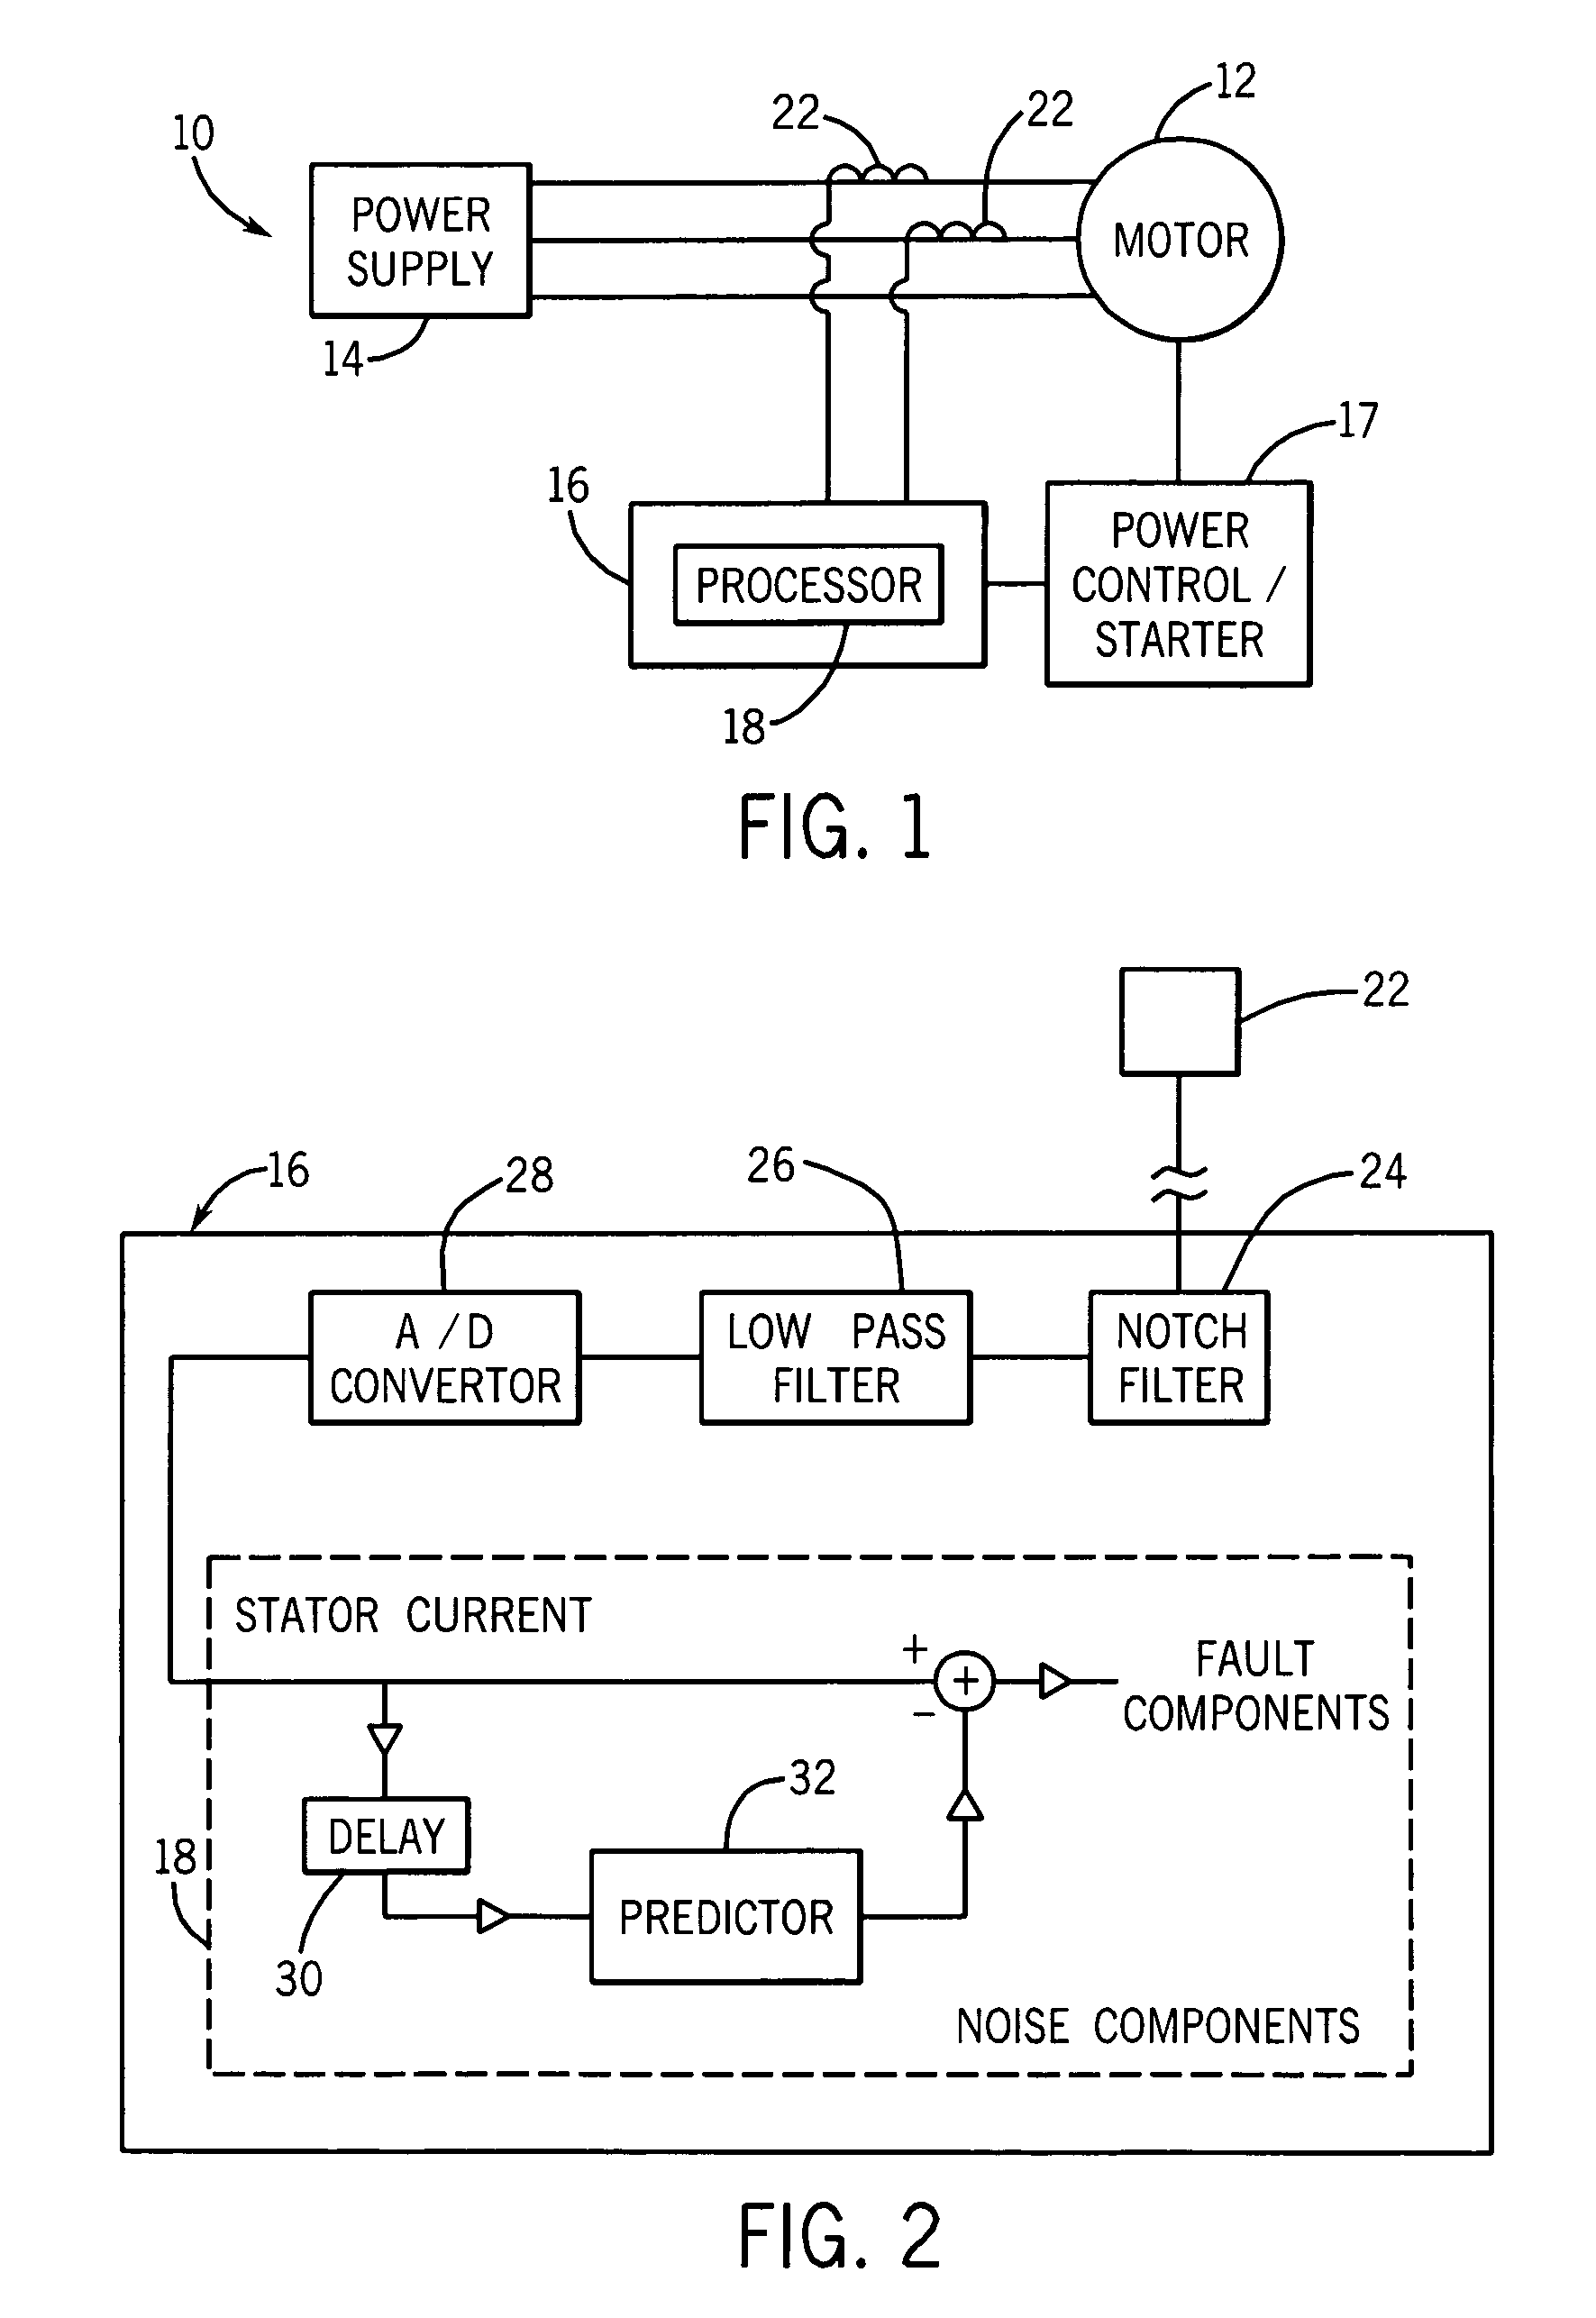 System and method for bearing fault detection using stator current noise cancellation